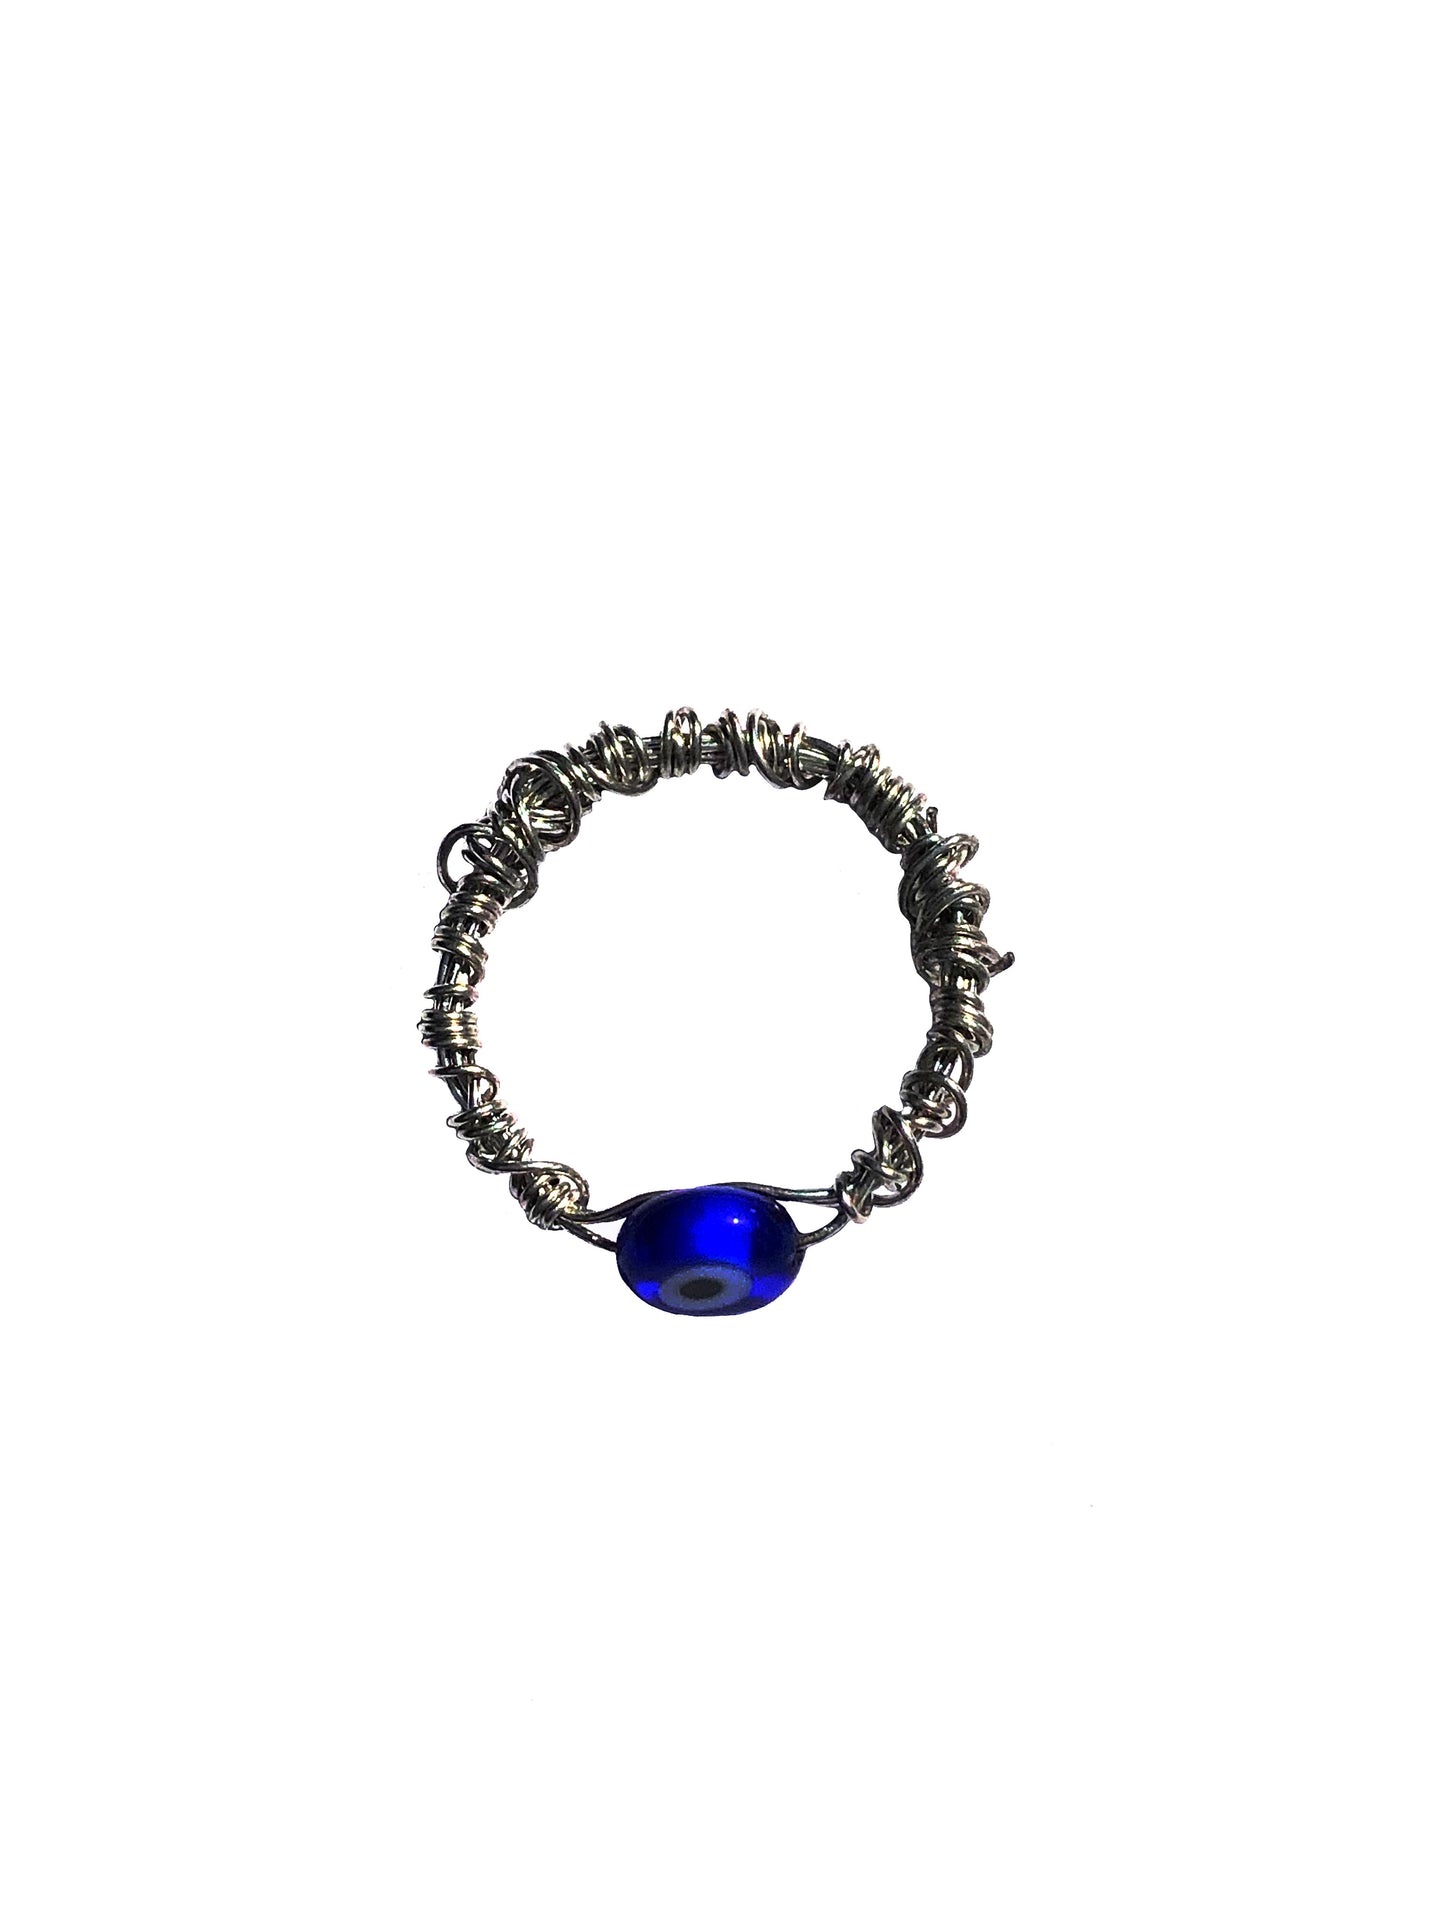 Handmade silver wire wrapped blue evil eye charm ring.